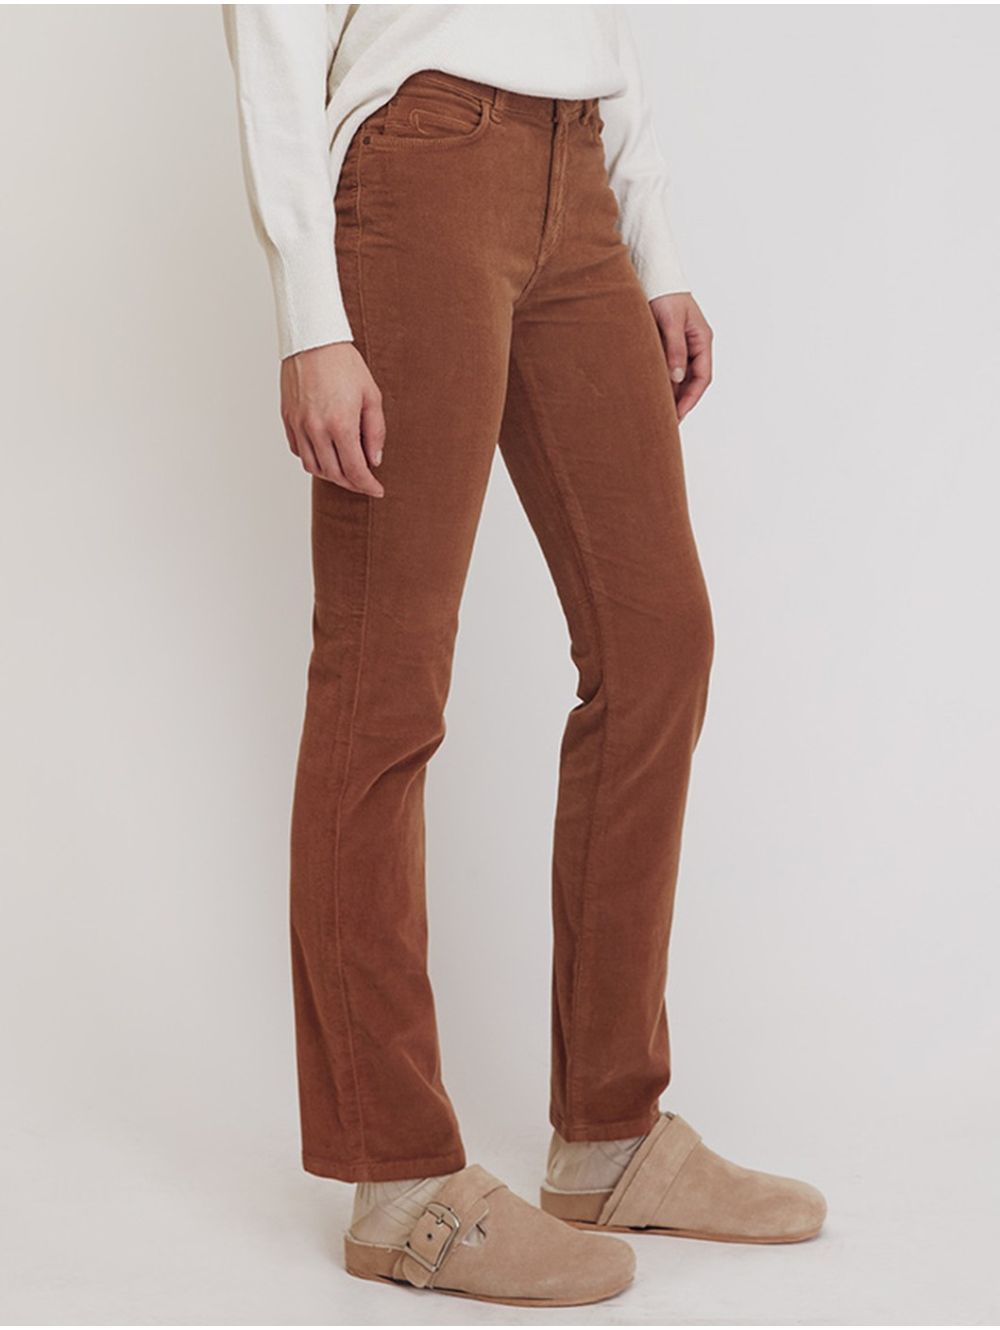 I Saw It First | Tailored Slim Fit Trousers | Camel | SportsDirect.com